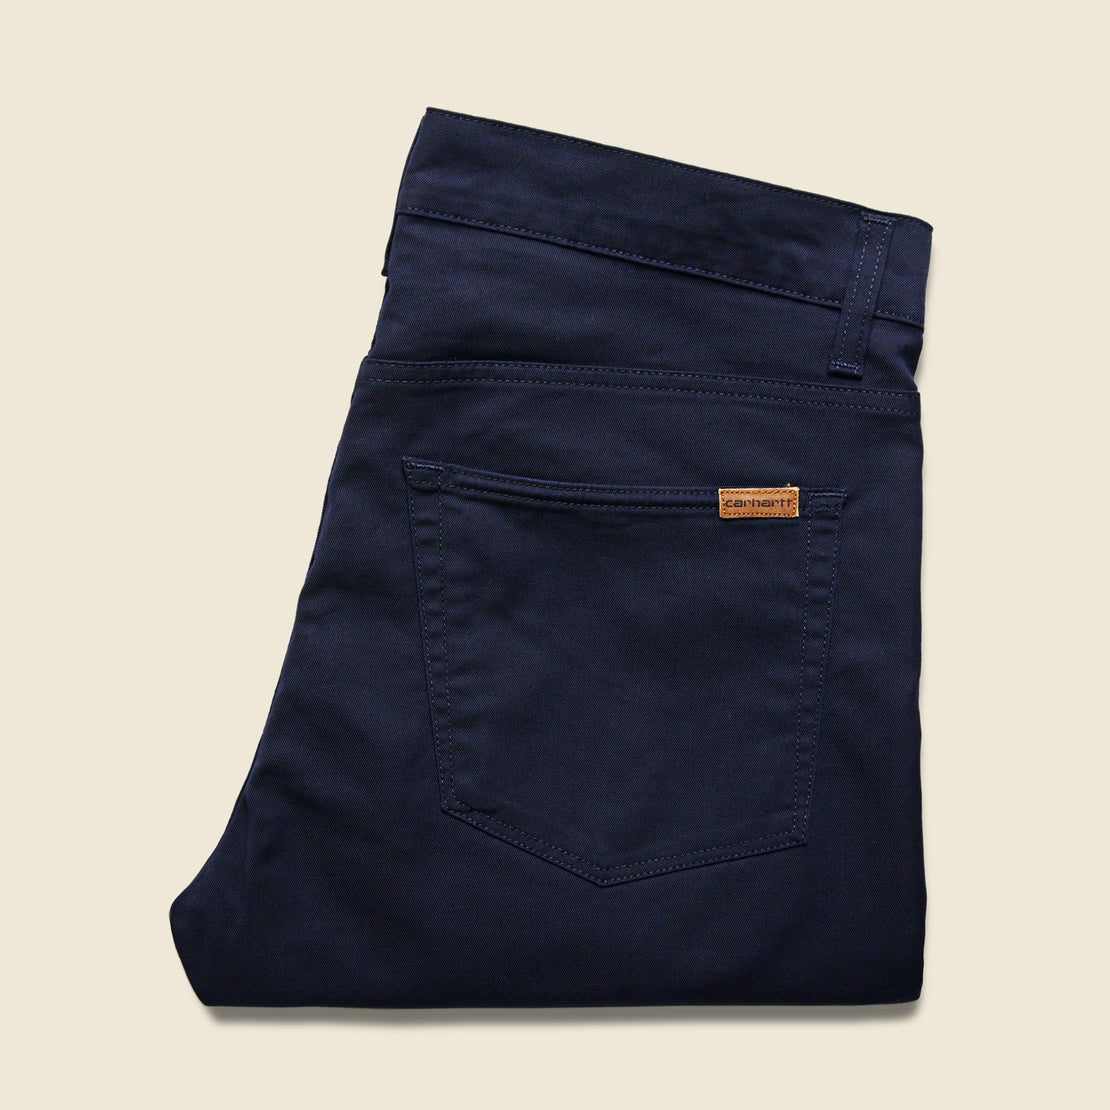 Vicious Pant - Dark Navy - Carhartt WIP - STAG Provisions - Pants - Twill